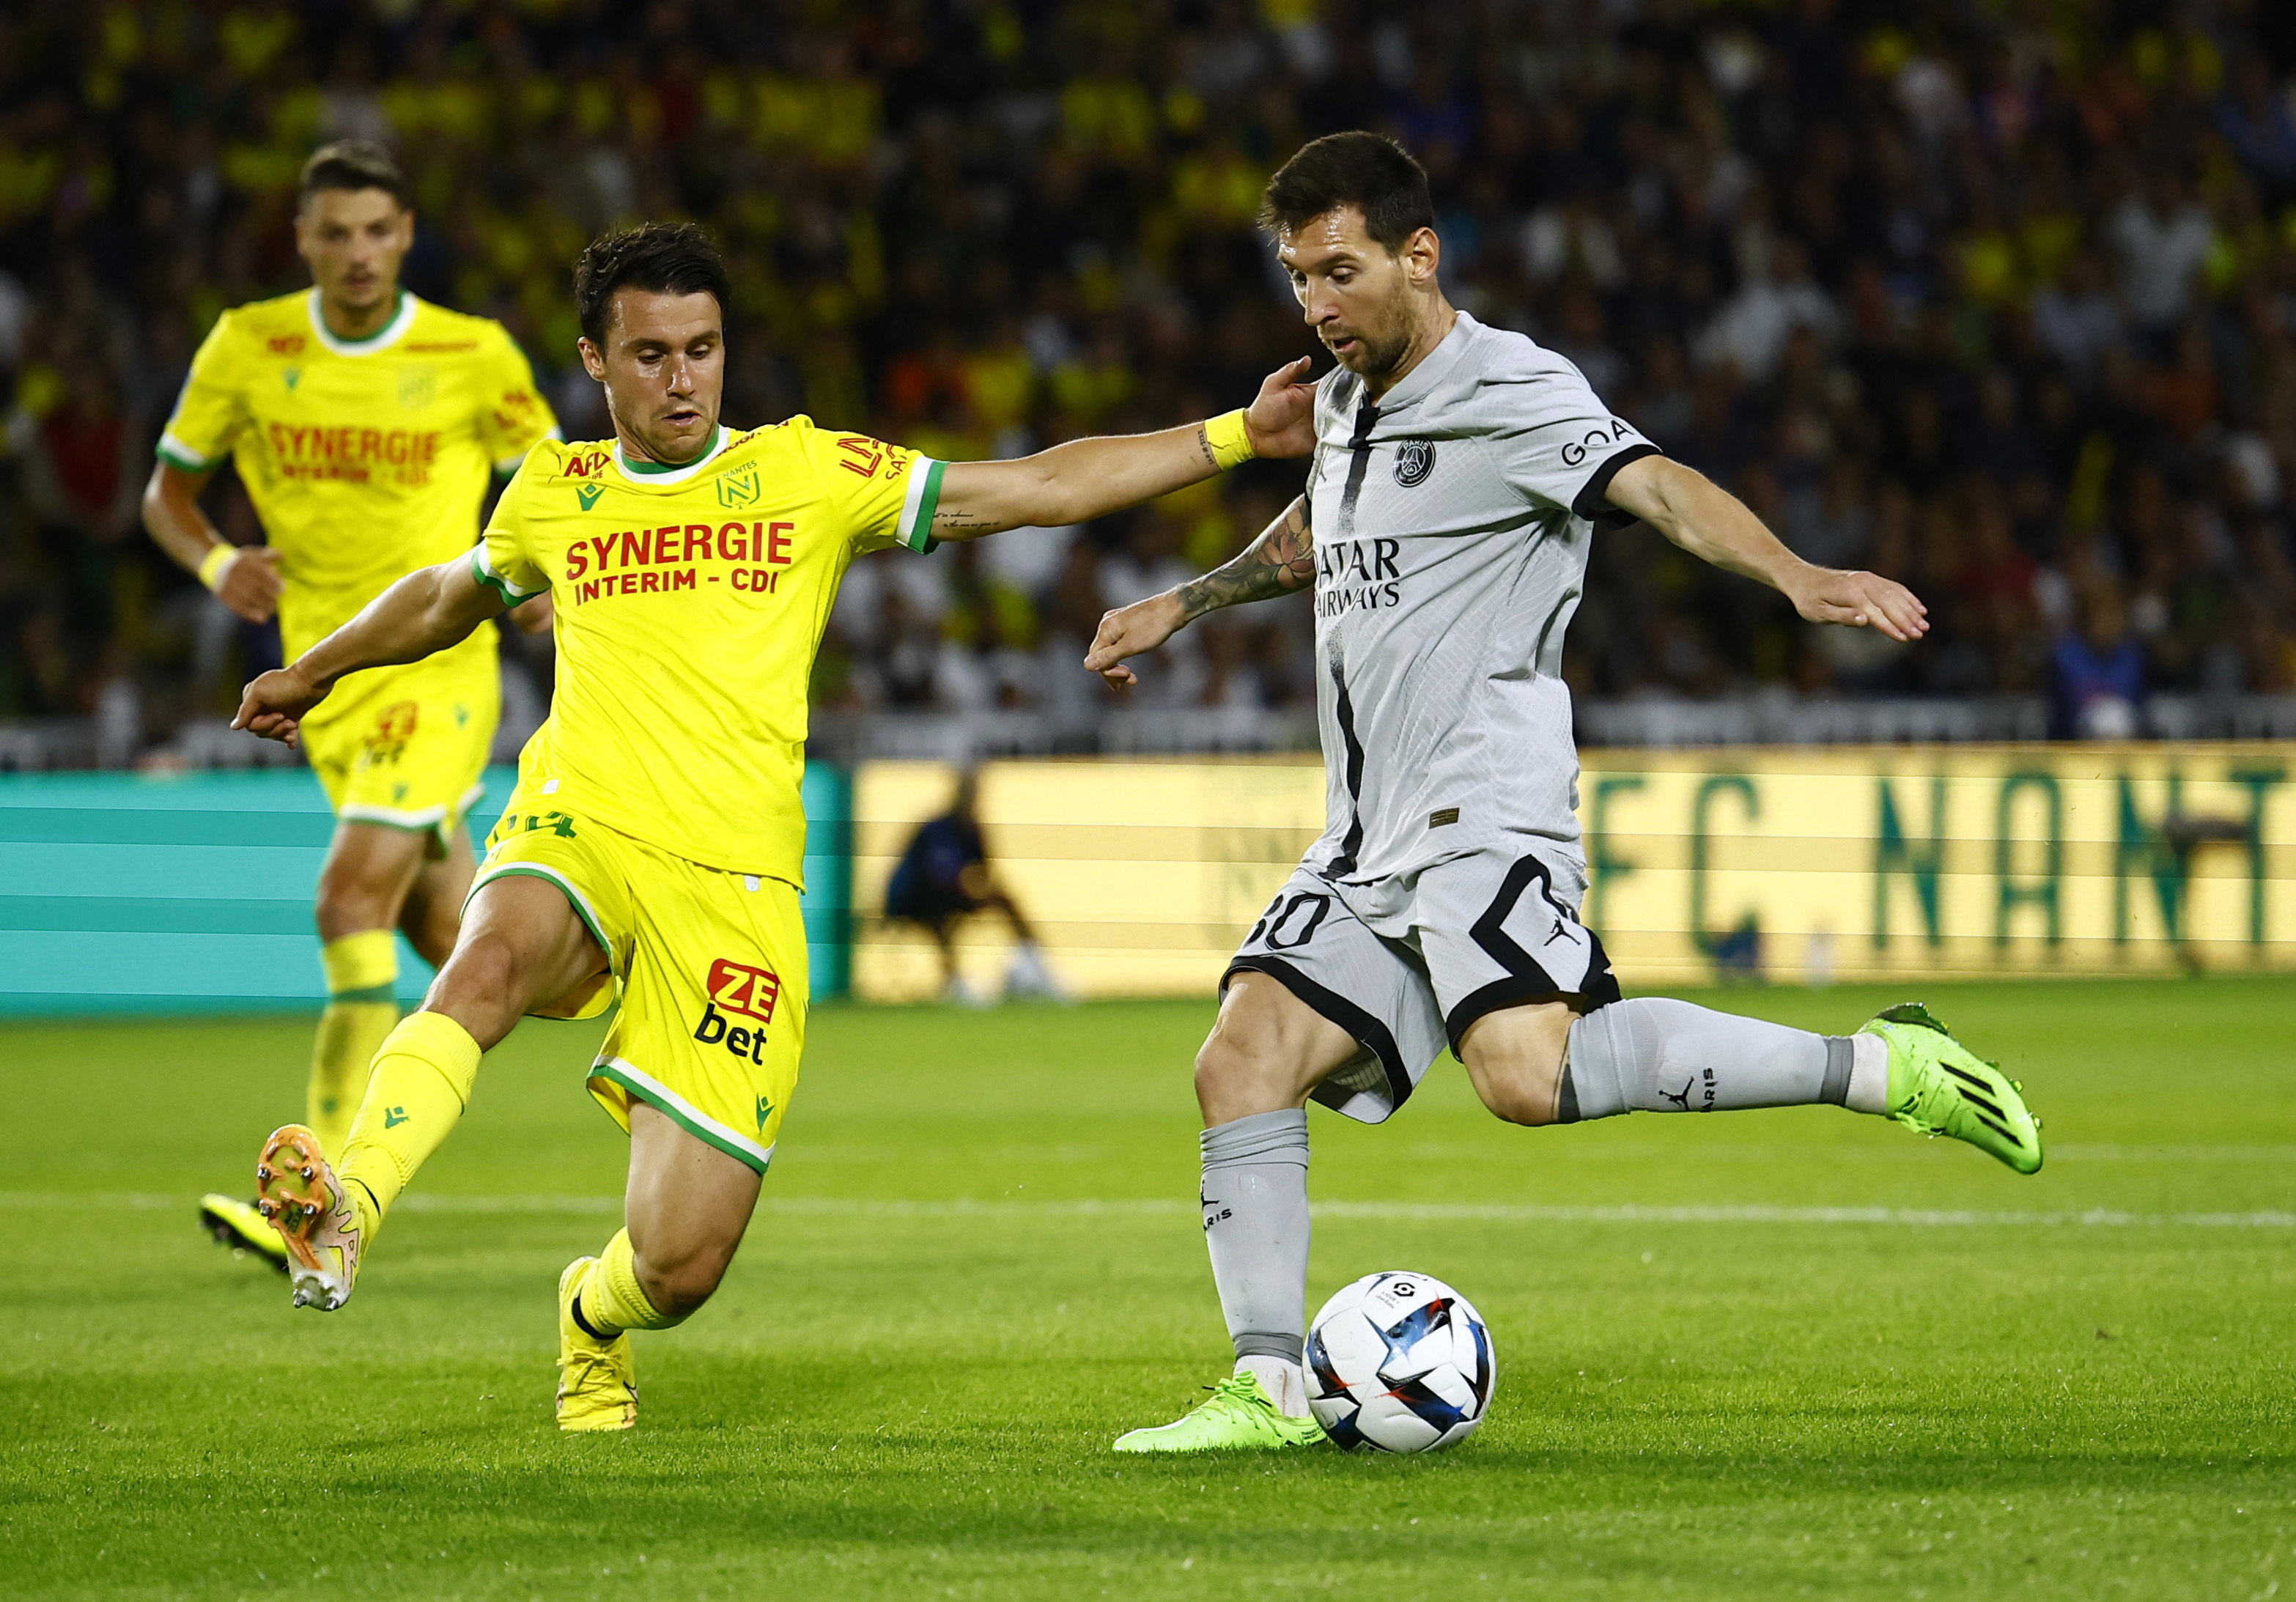 PSG will seek to get closer to the Ligue 1 title against Nantes (REUTERS / Stephane Mahe)